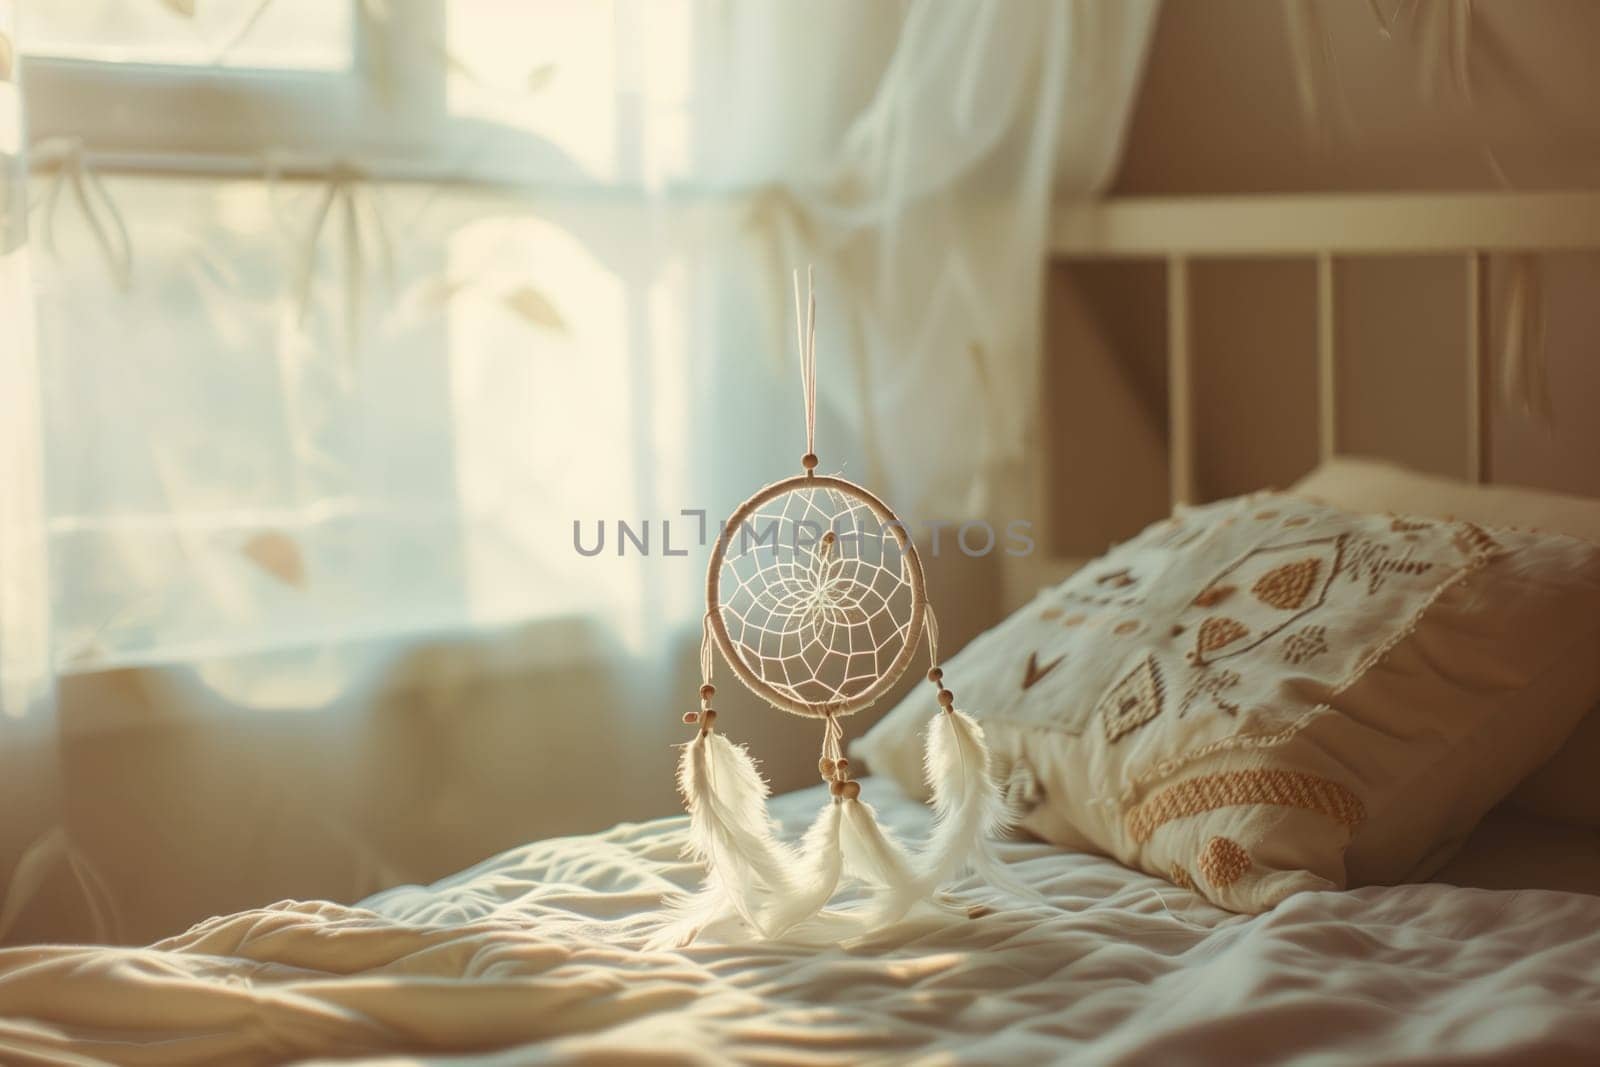 A wooden dream catcher hangs above a hardwood bed near a window, creating a serene still life photography scene in the room with glass accents and natural linens